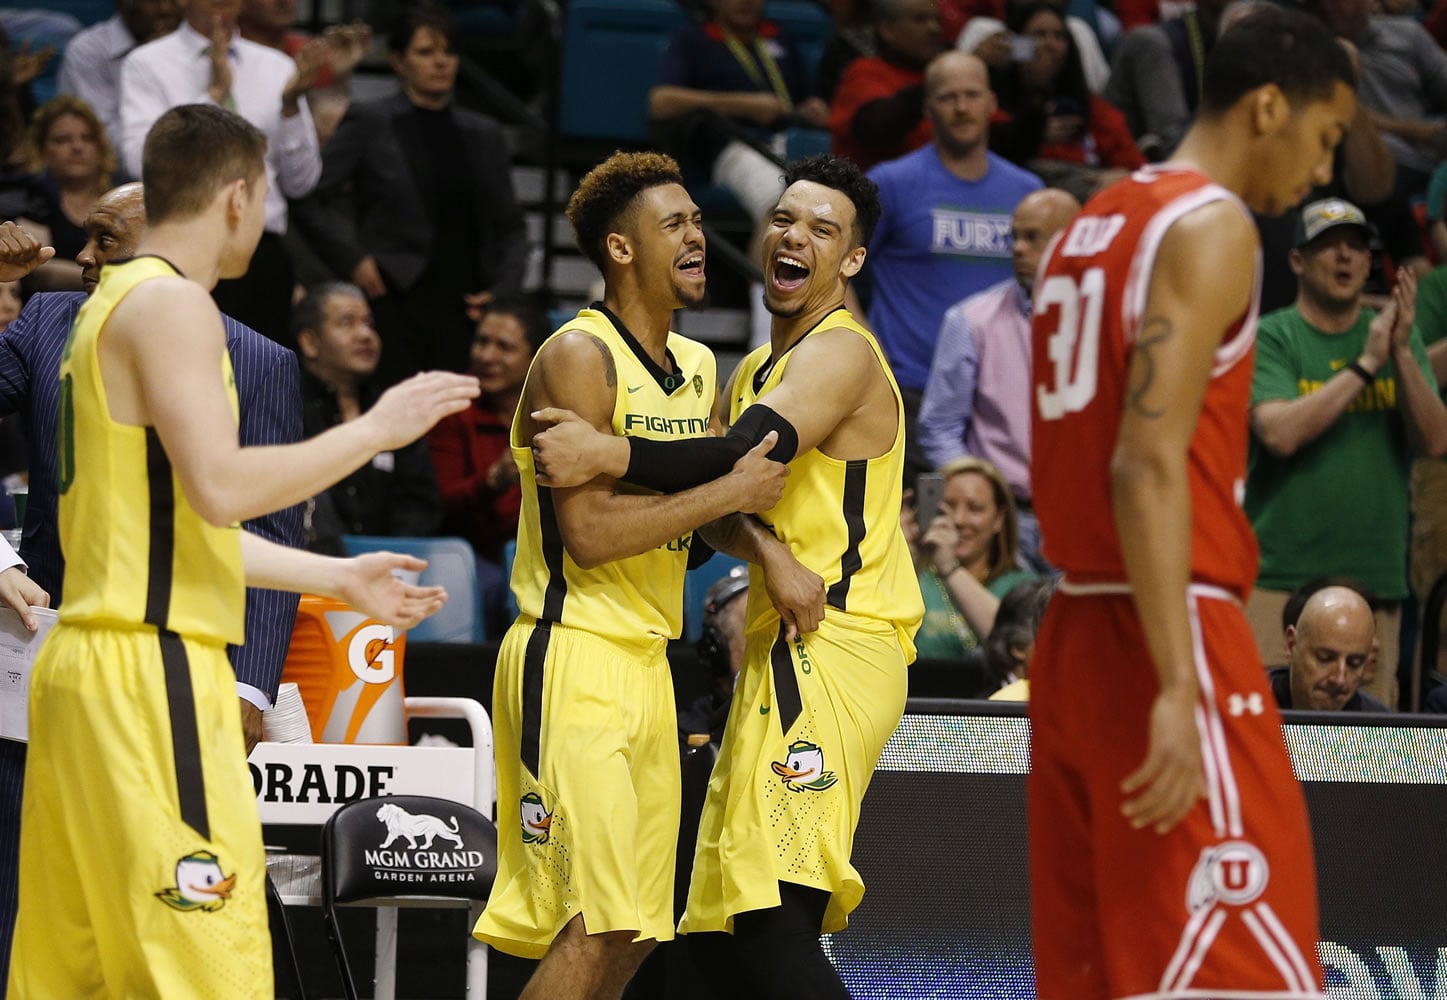 Oregon guard Tyler Dorsey, center left, embraces forward Dillon Brooks as they celebrate after Oregon defeated Utah in an NCAA college basketball game in the championship of the Pac-12 men's tournament Saturday, March 12, 2016, in Las Vegas. Oregon won 88-57.